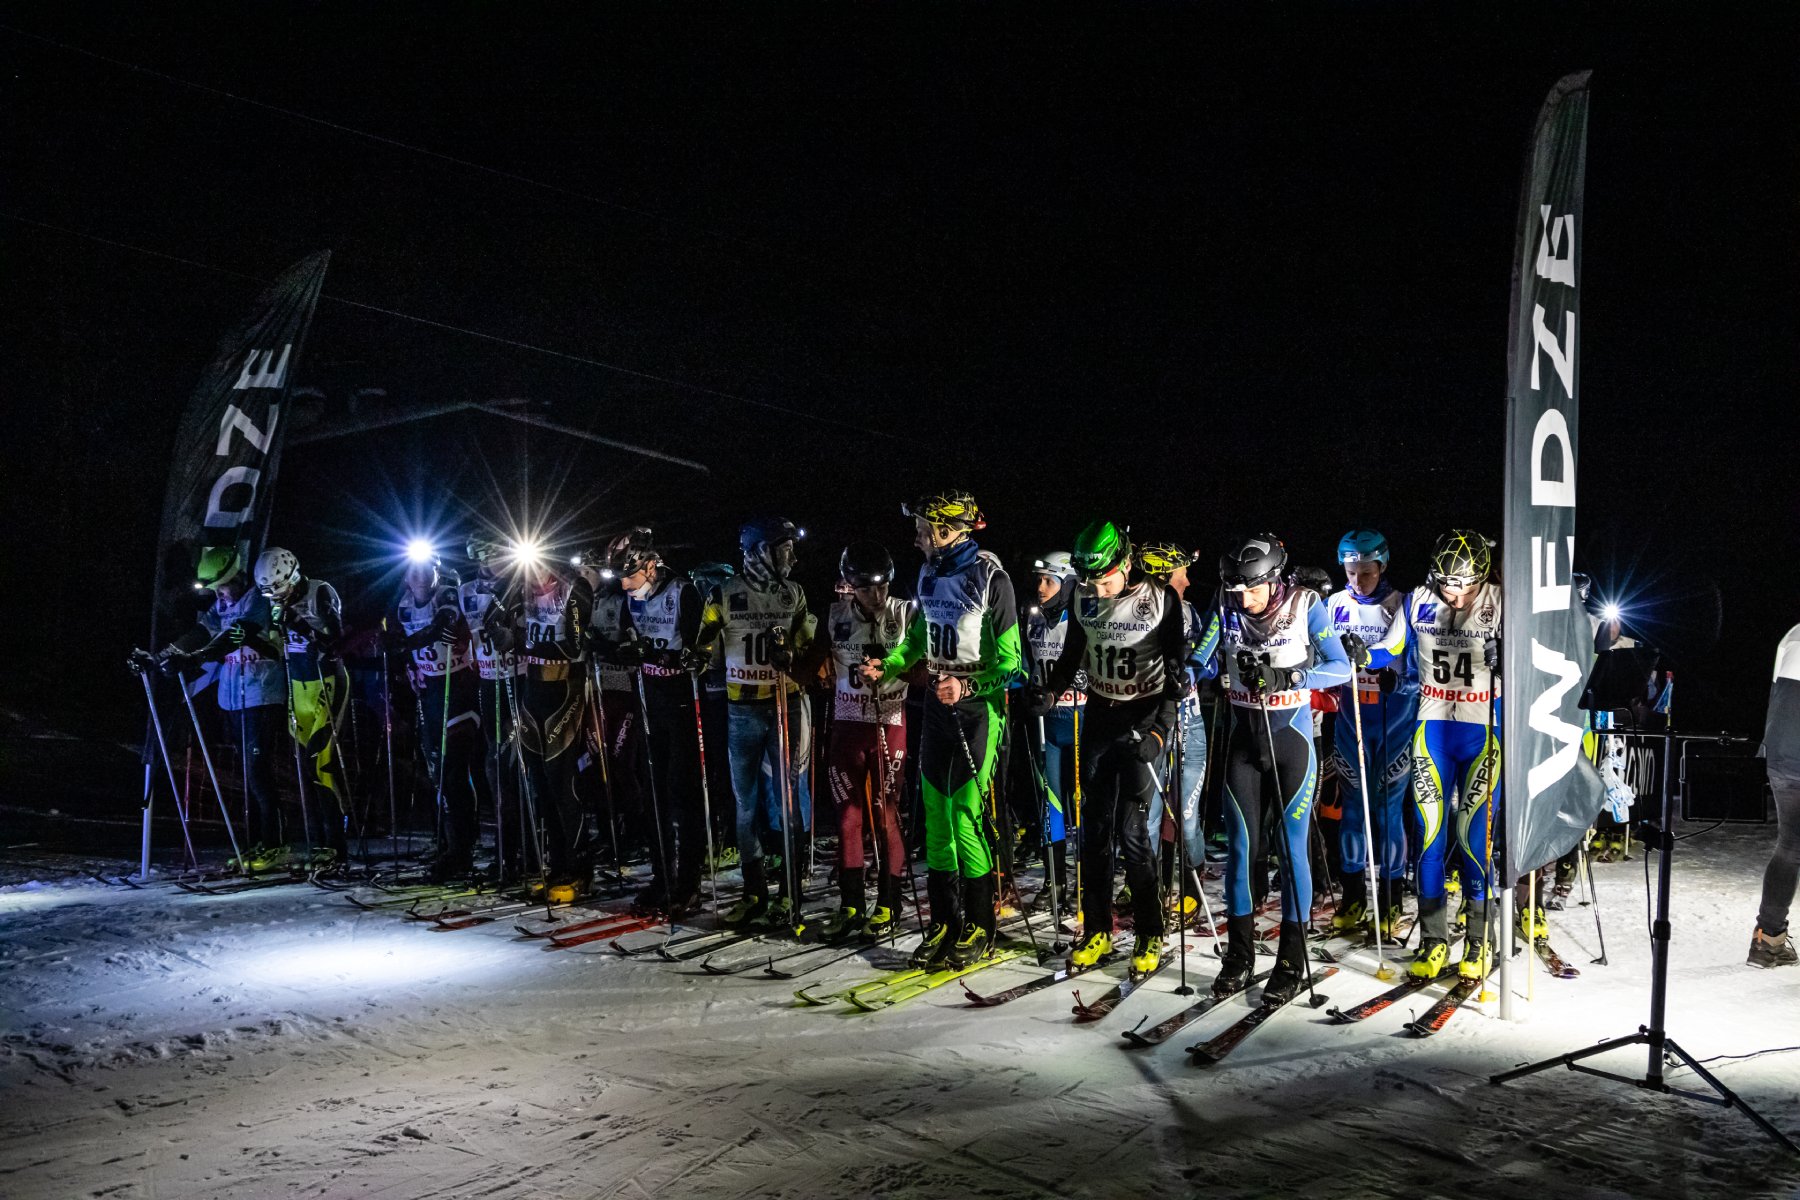 heartbreaking start line - skiers lined up at night, headlamp lighting